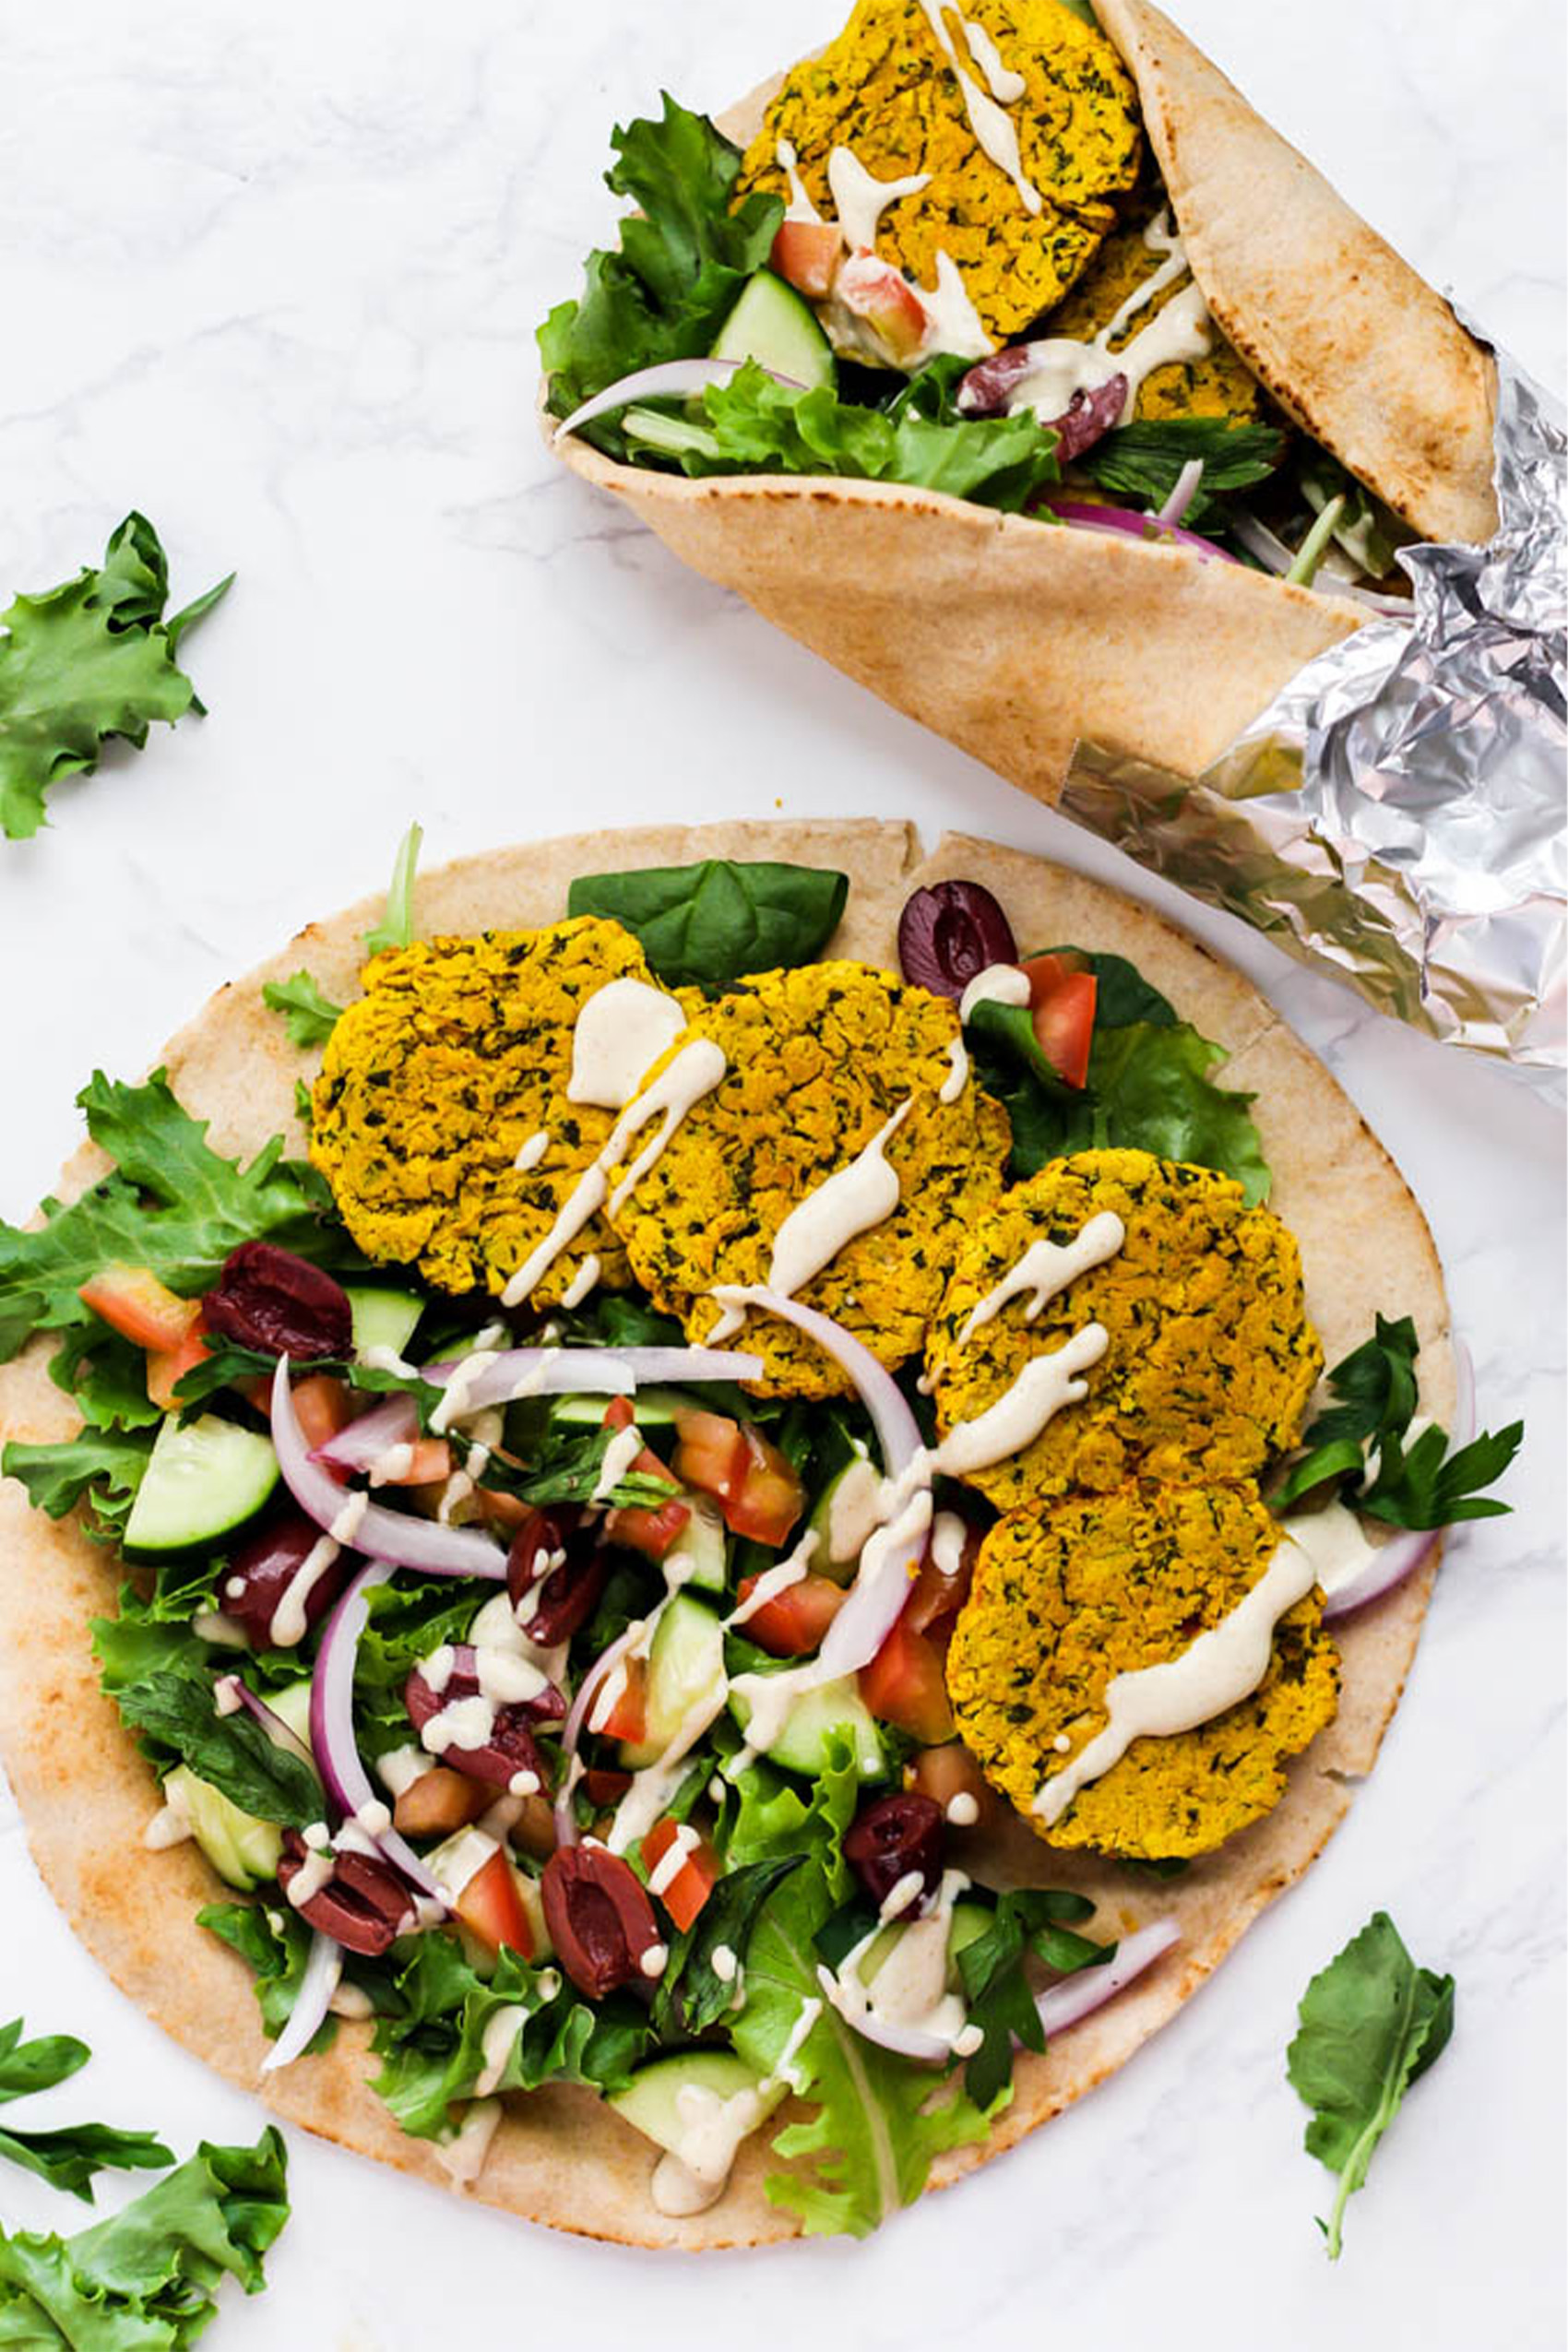 two pitas filled with greens, chopped vegetables and falafels